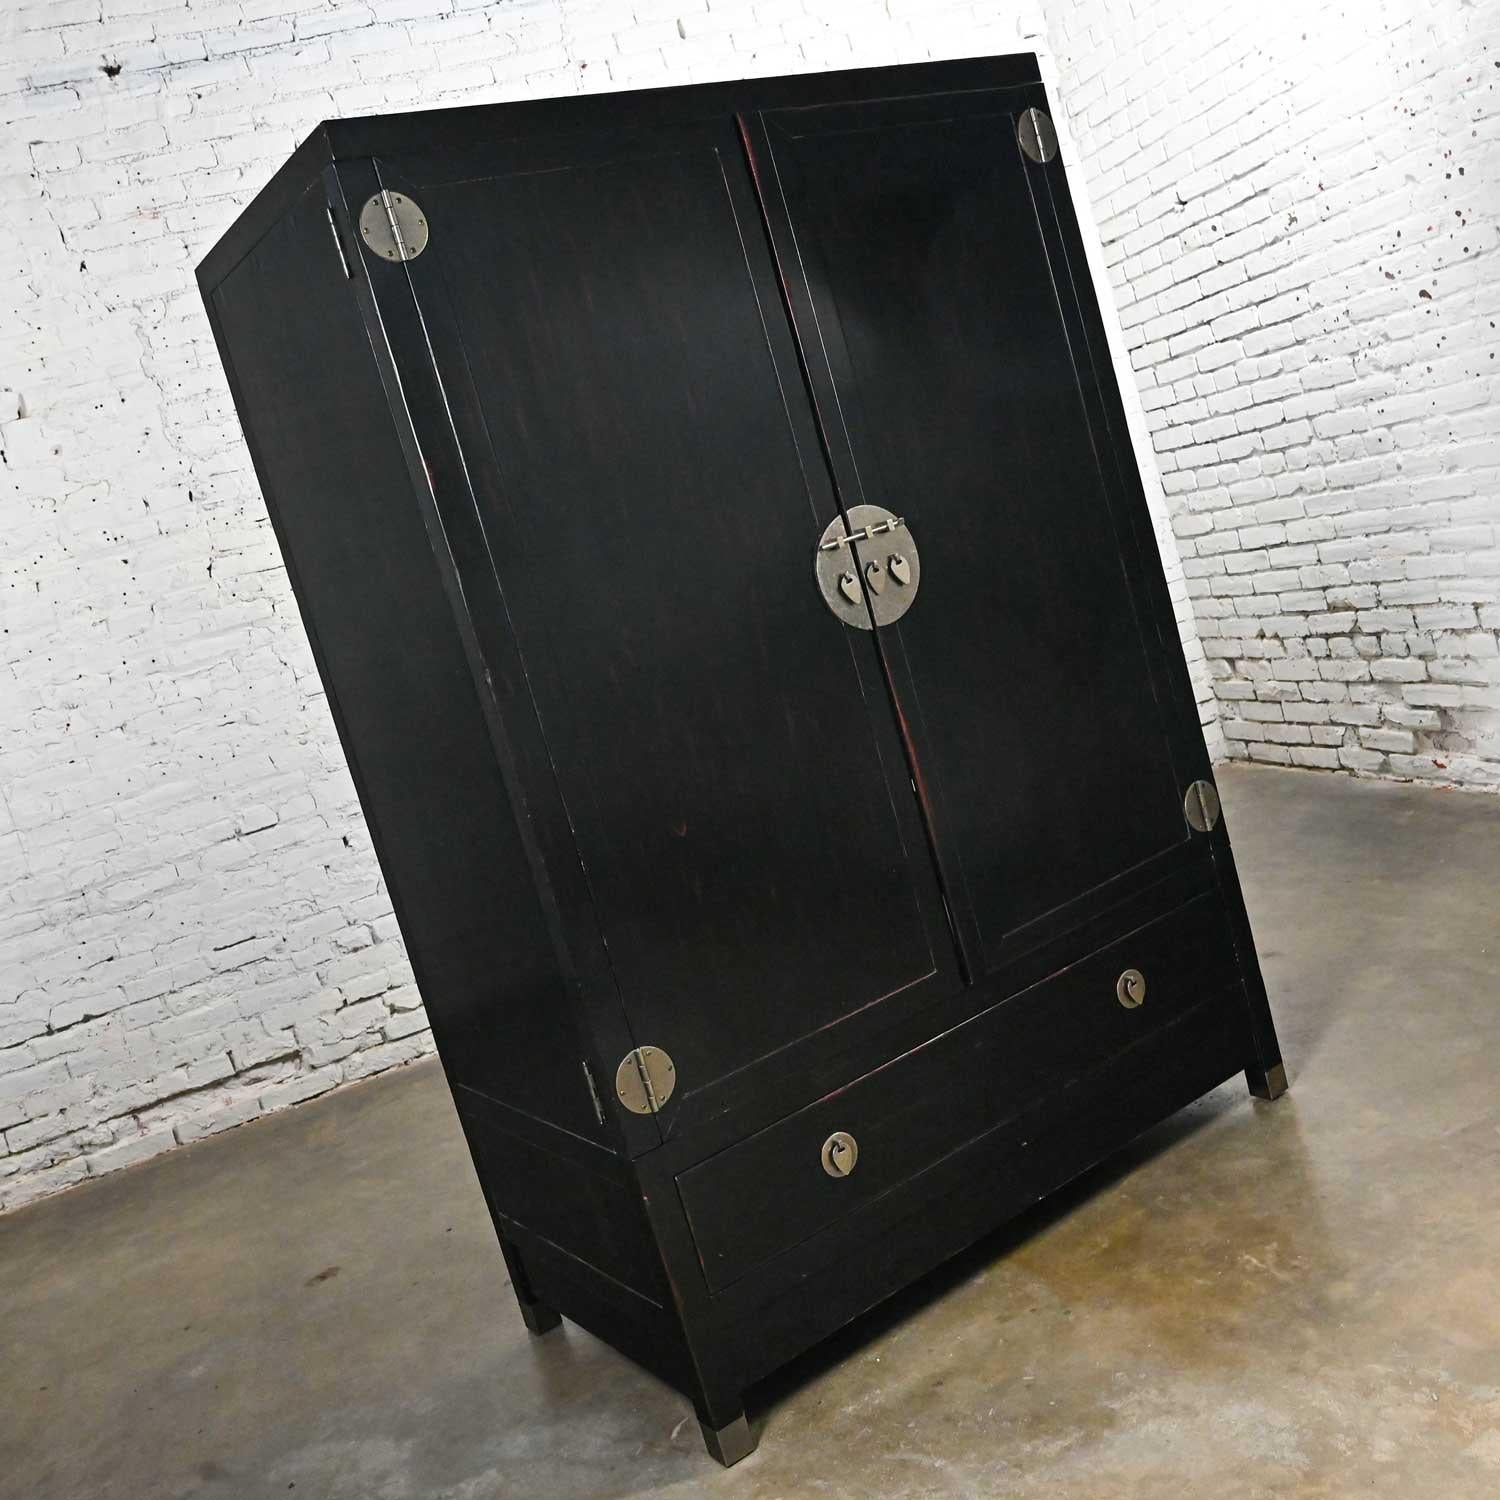 Handsome vintage chinoiserie Baker Milling road Line entertainment storage cabinet with black lacquered Asian style finish and pewter-like patinated steel hardware. Similar in style to Baker’s own mid-century Far East Collection by Michael Taylor.